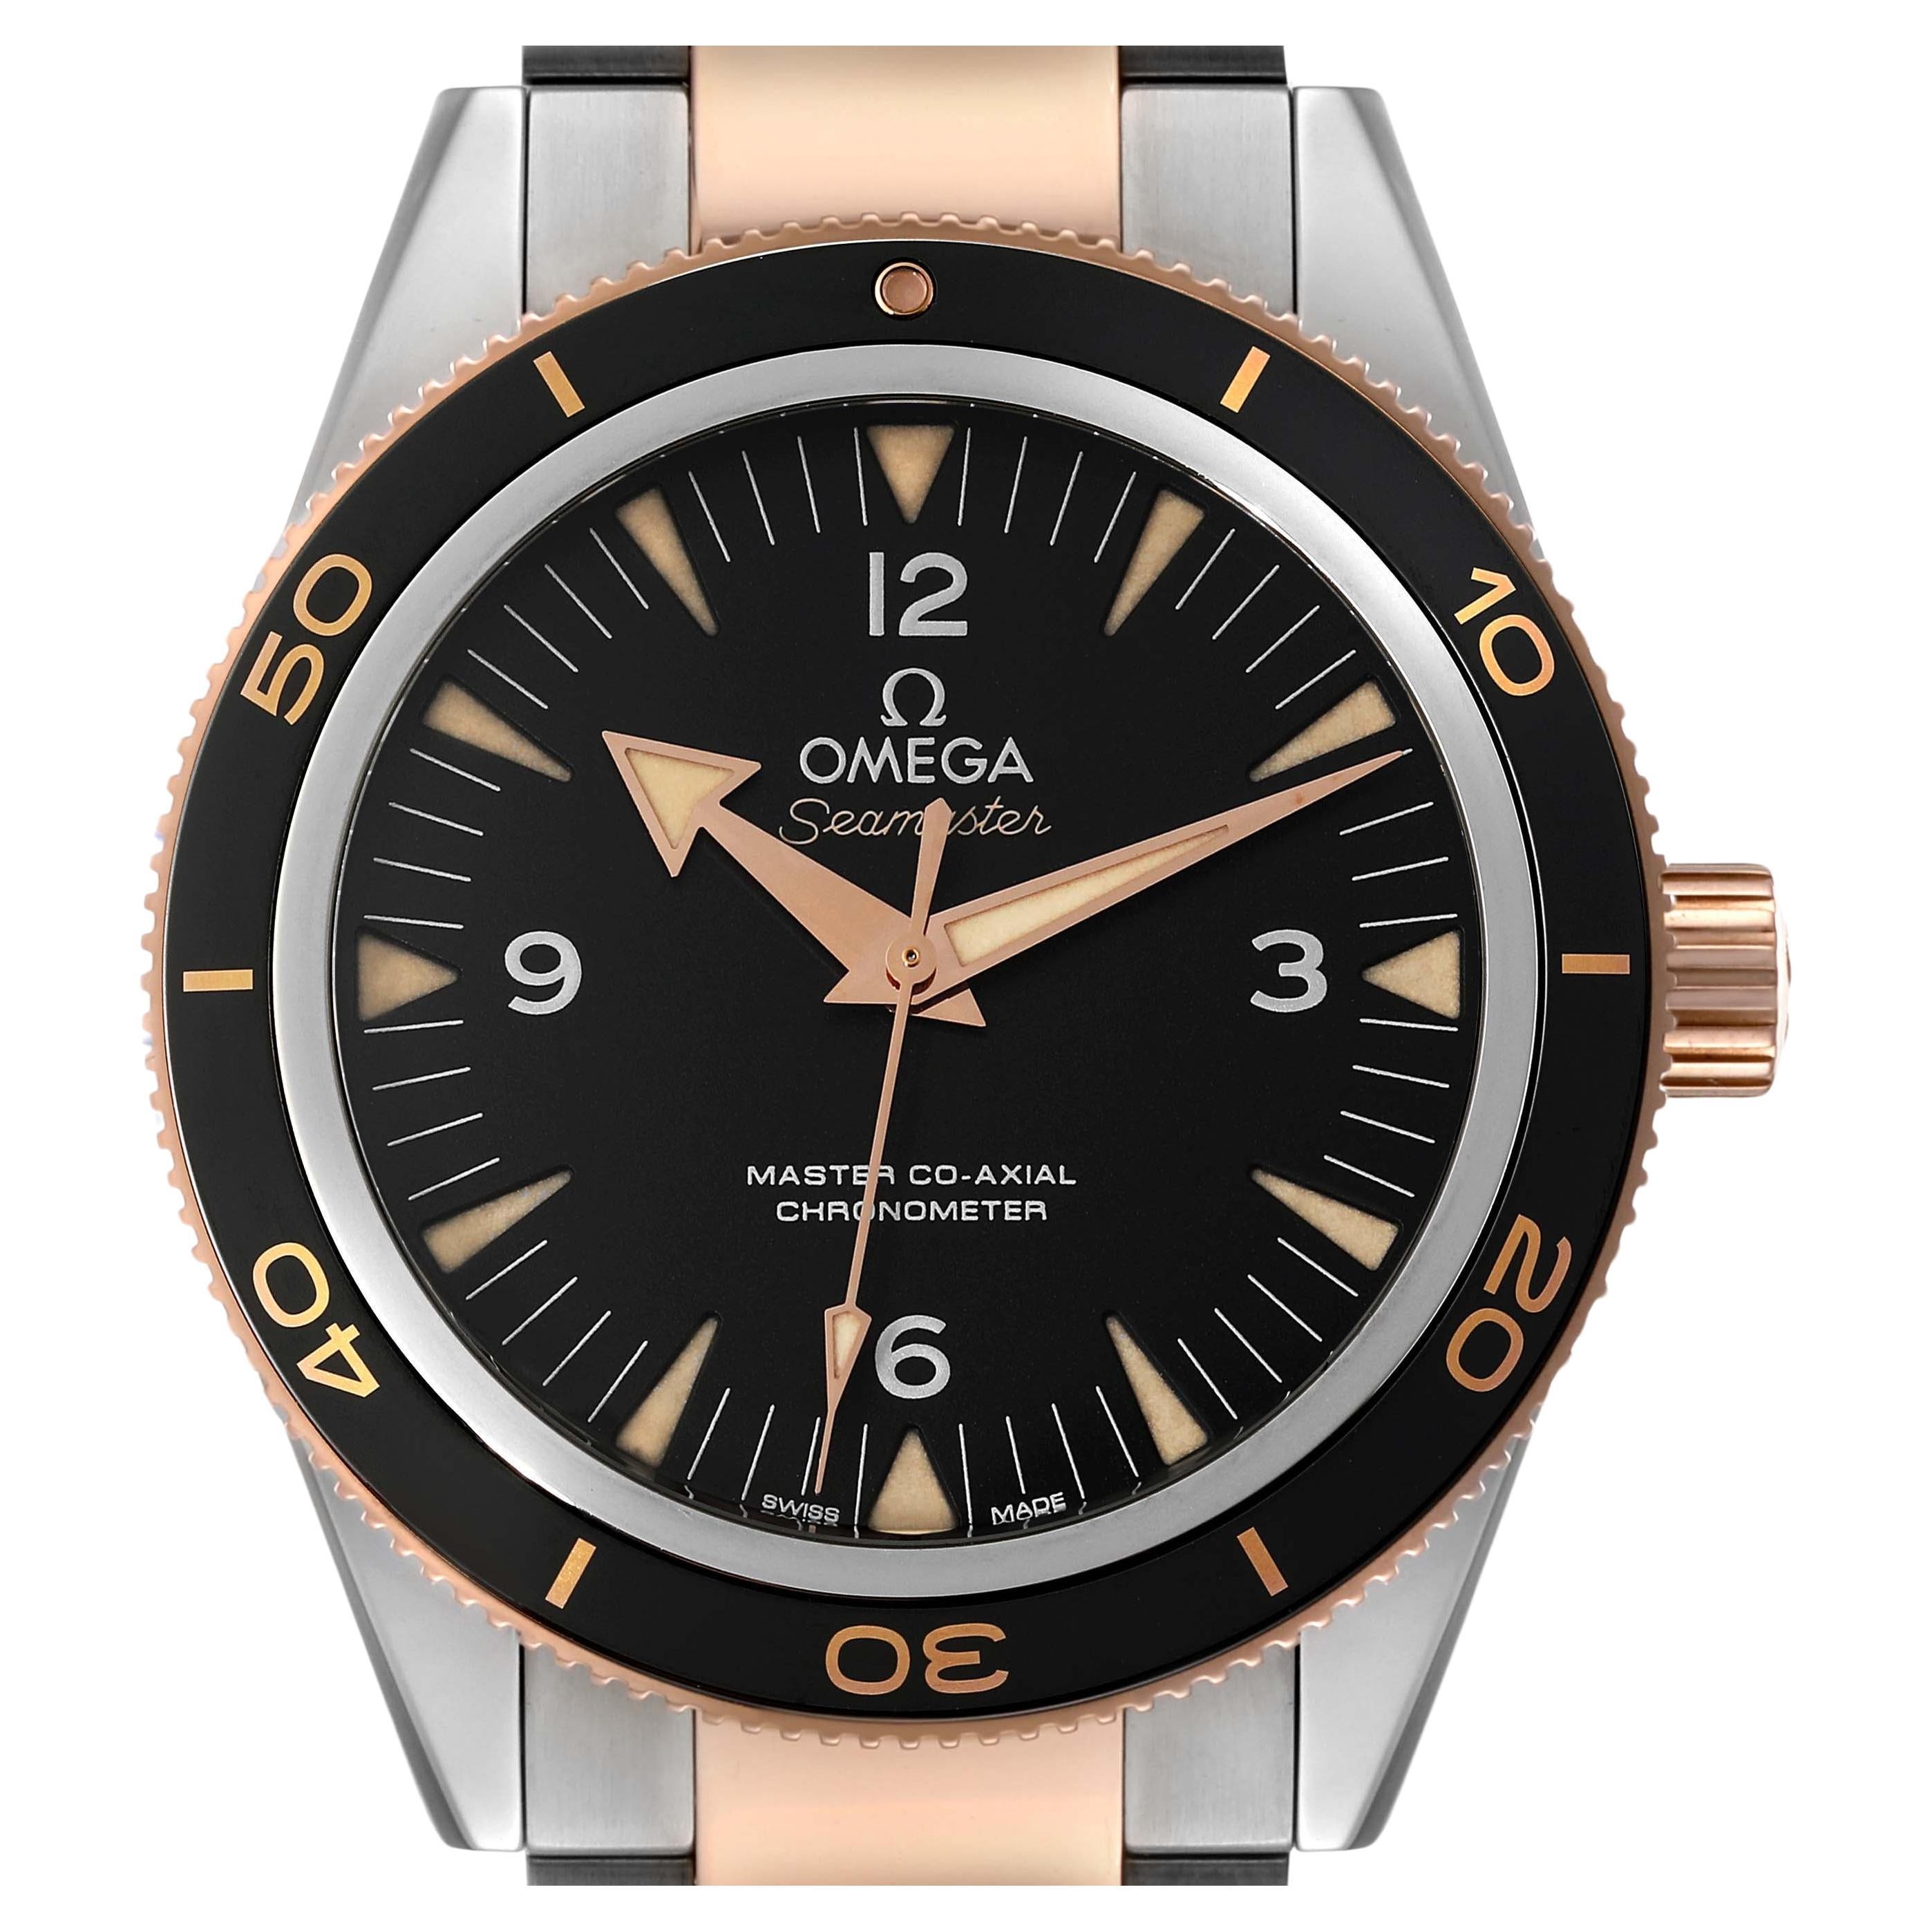 Omega Seamaster 300M Co-Axial Steel Rose Gold Watch 233.20.41.21.01.001 For Sale